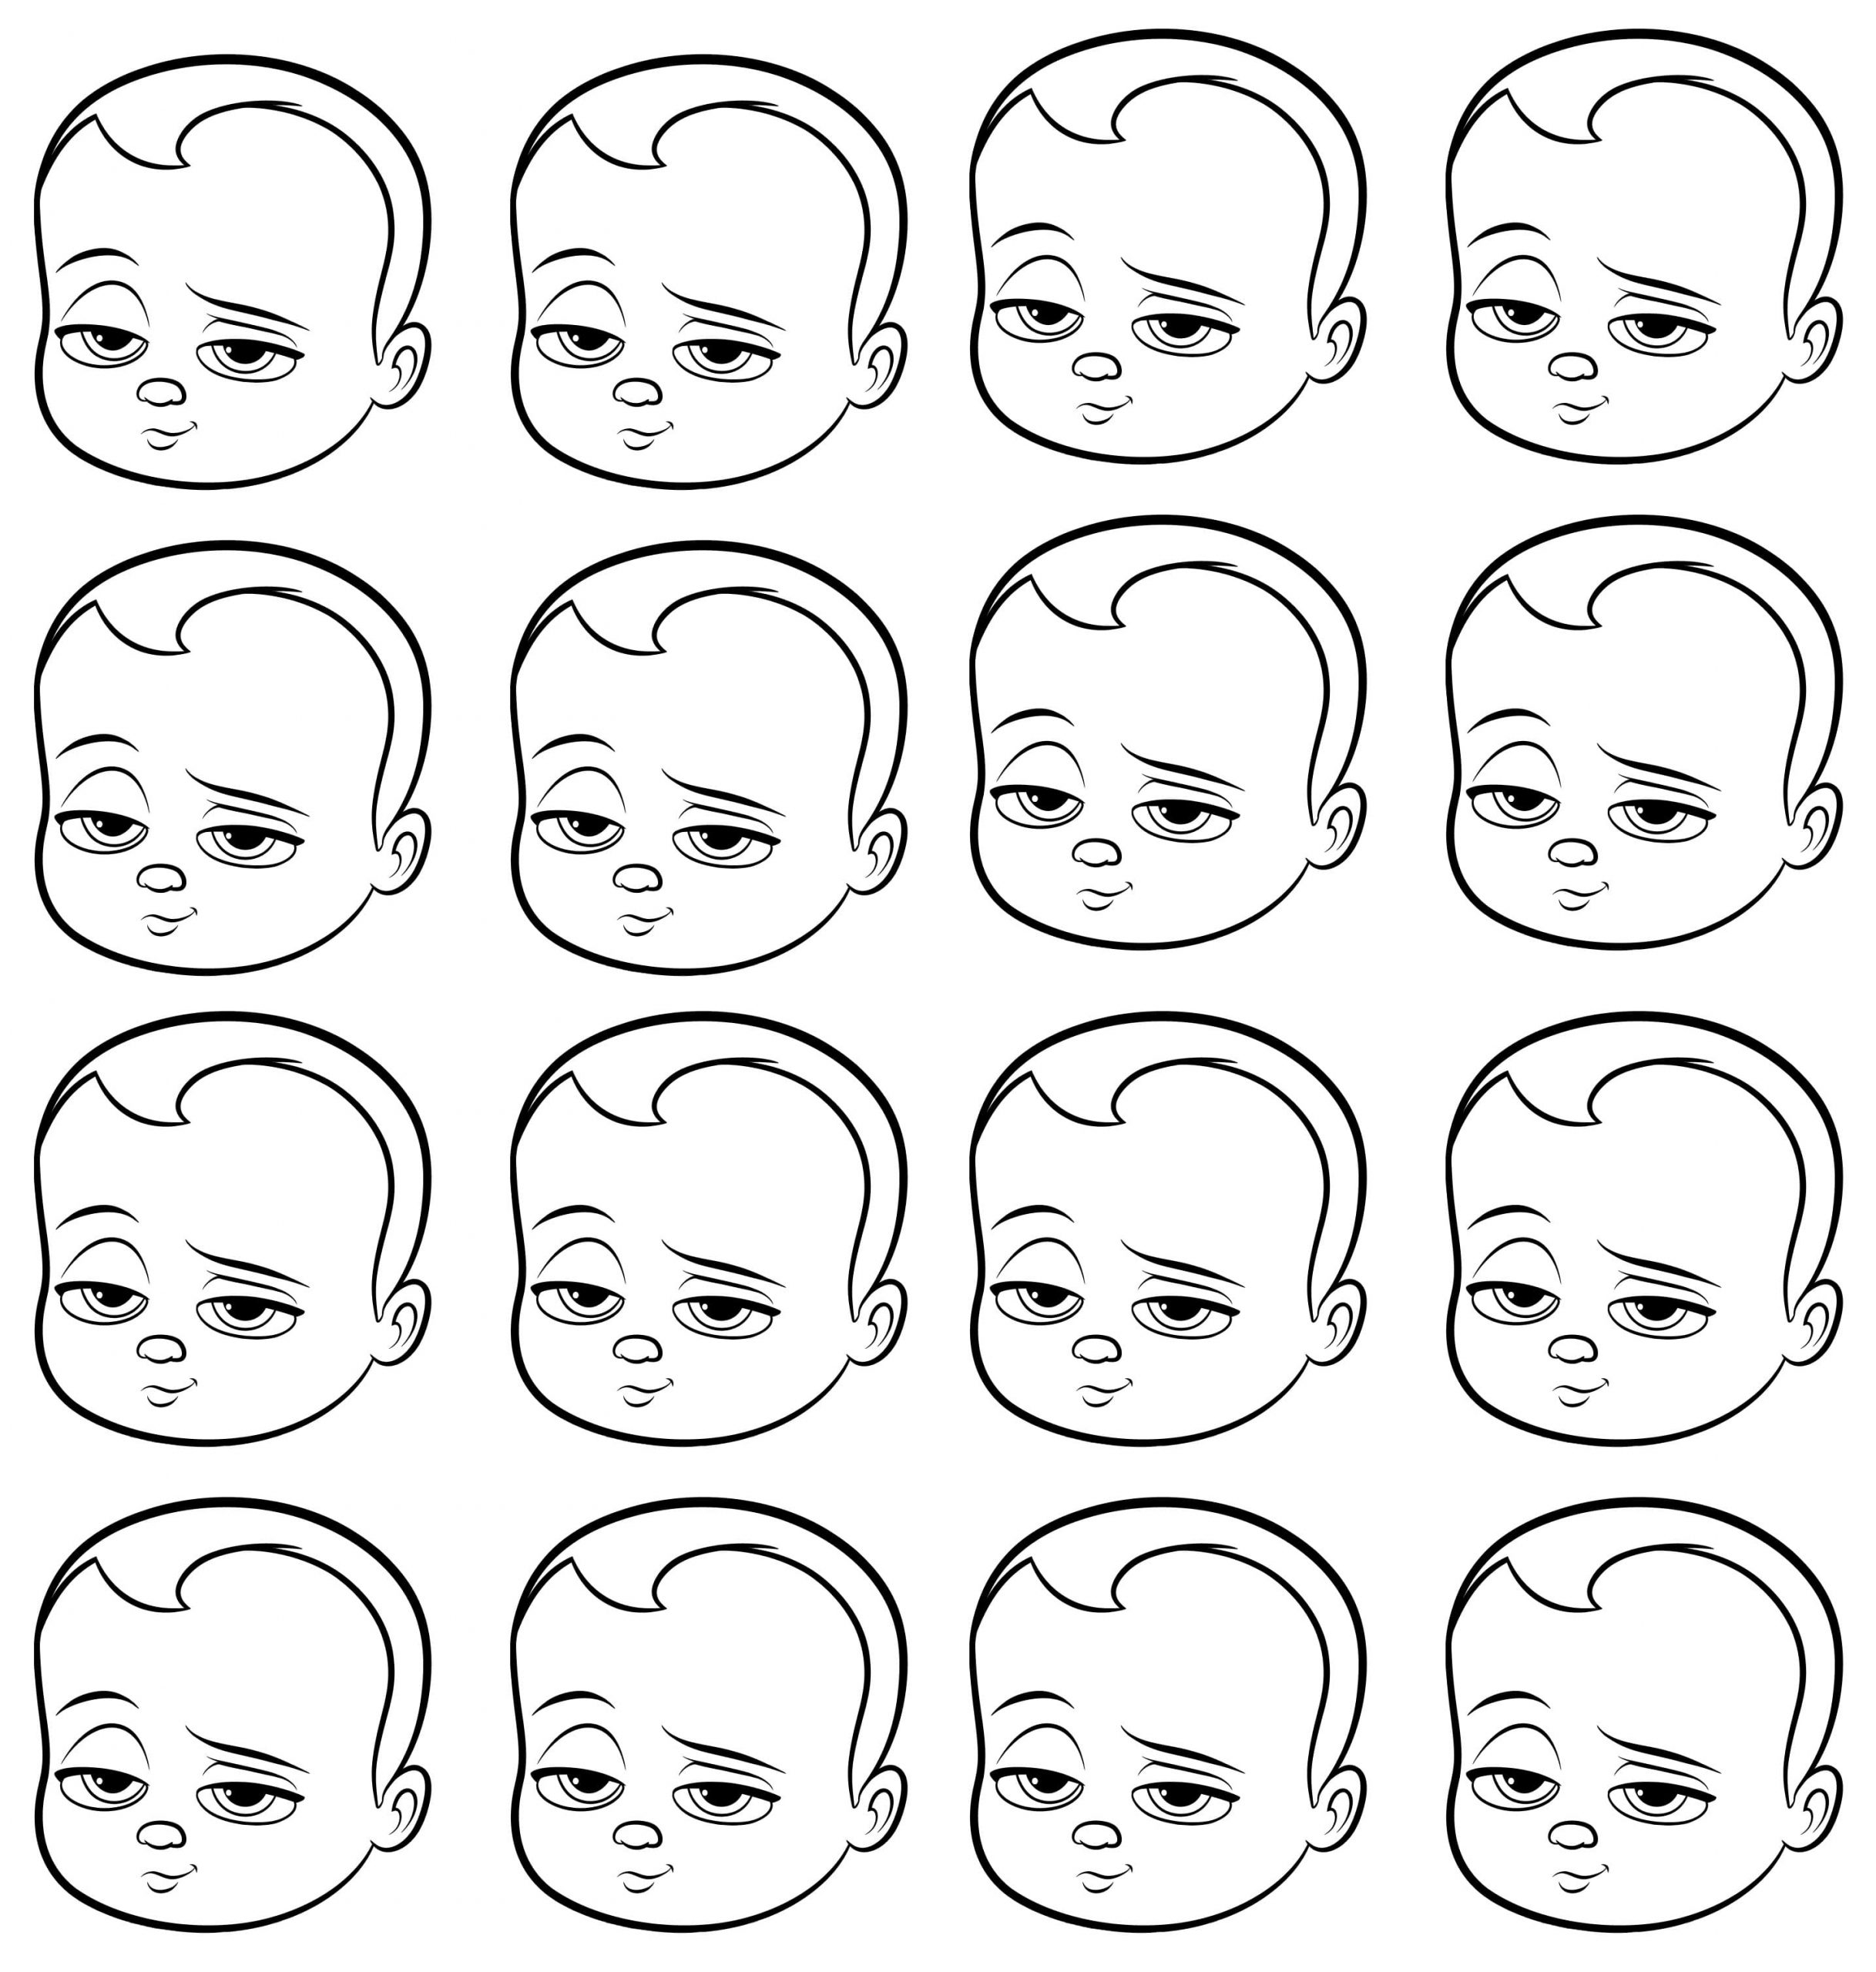 Face Boss Baby Coloring Page